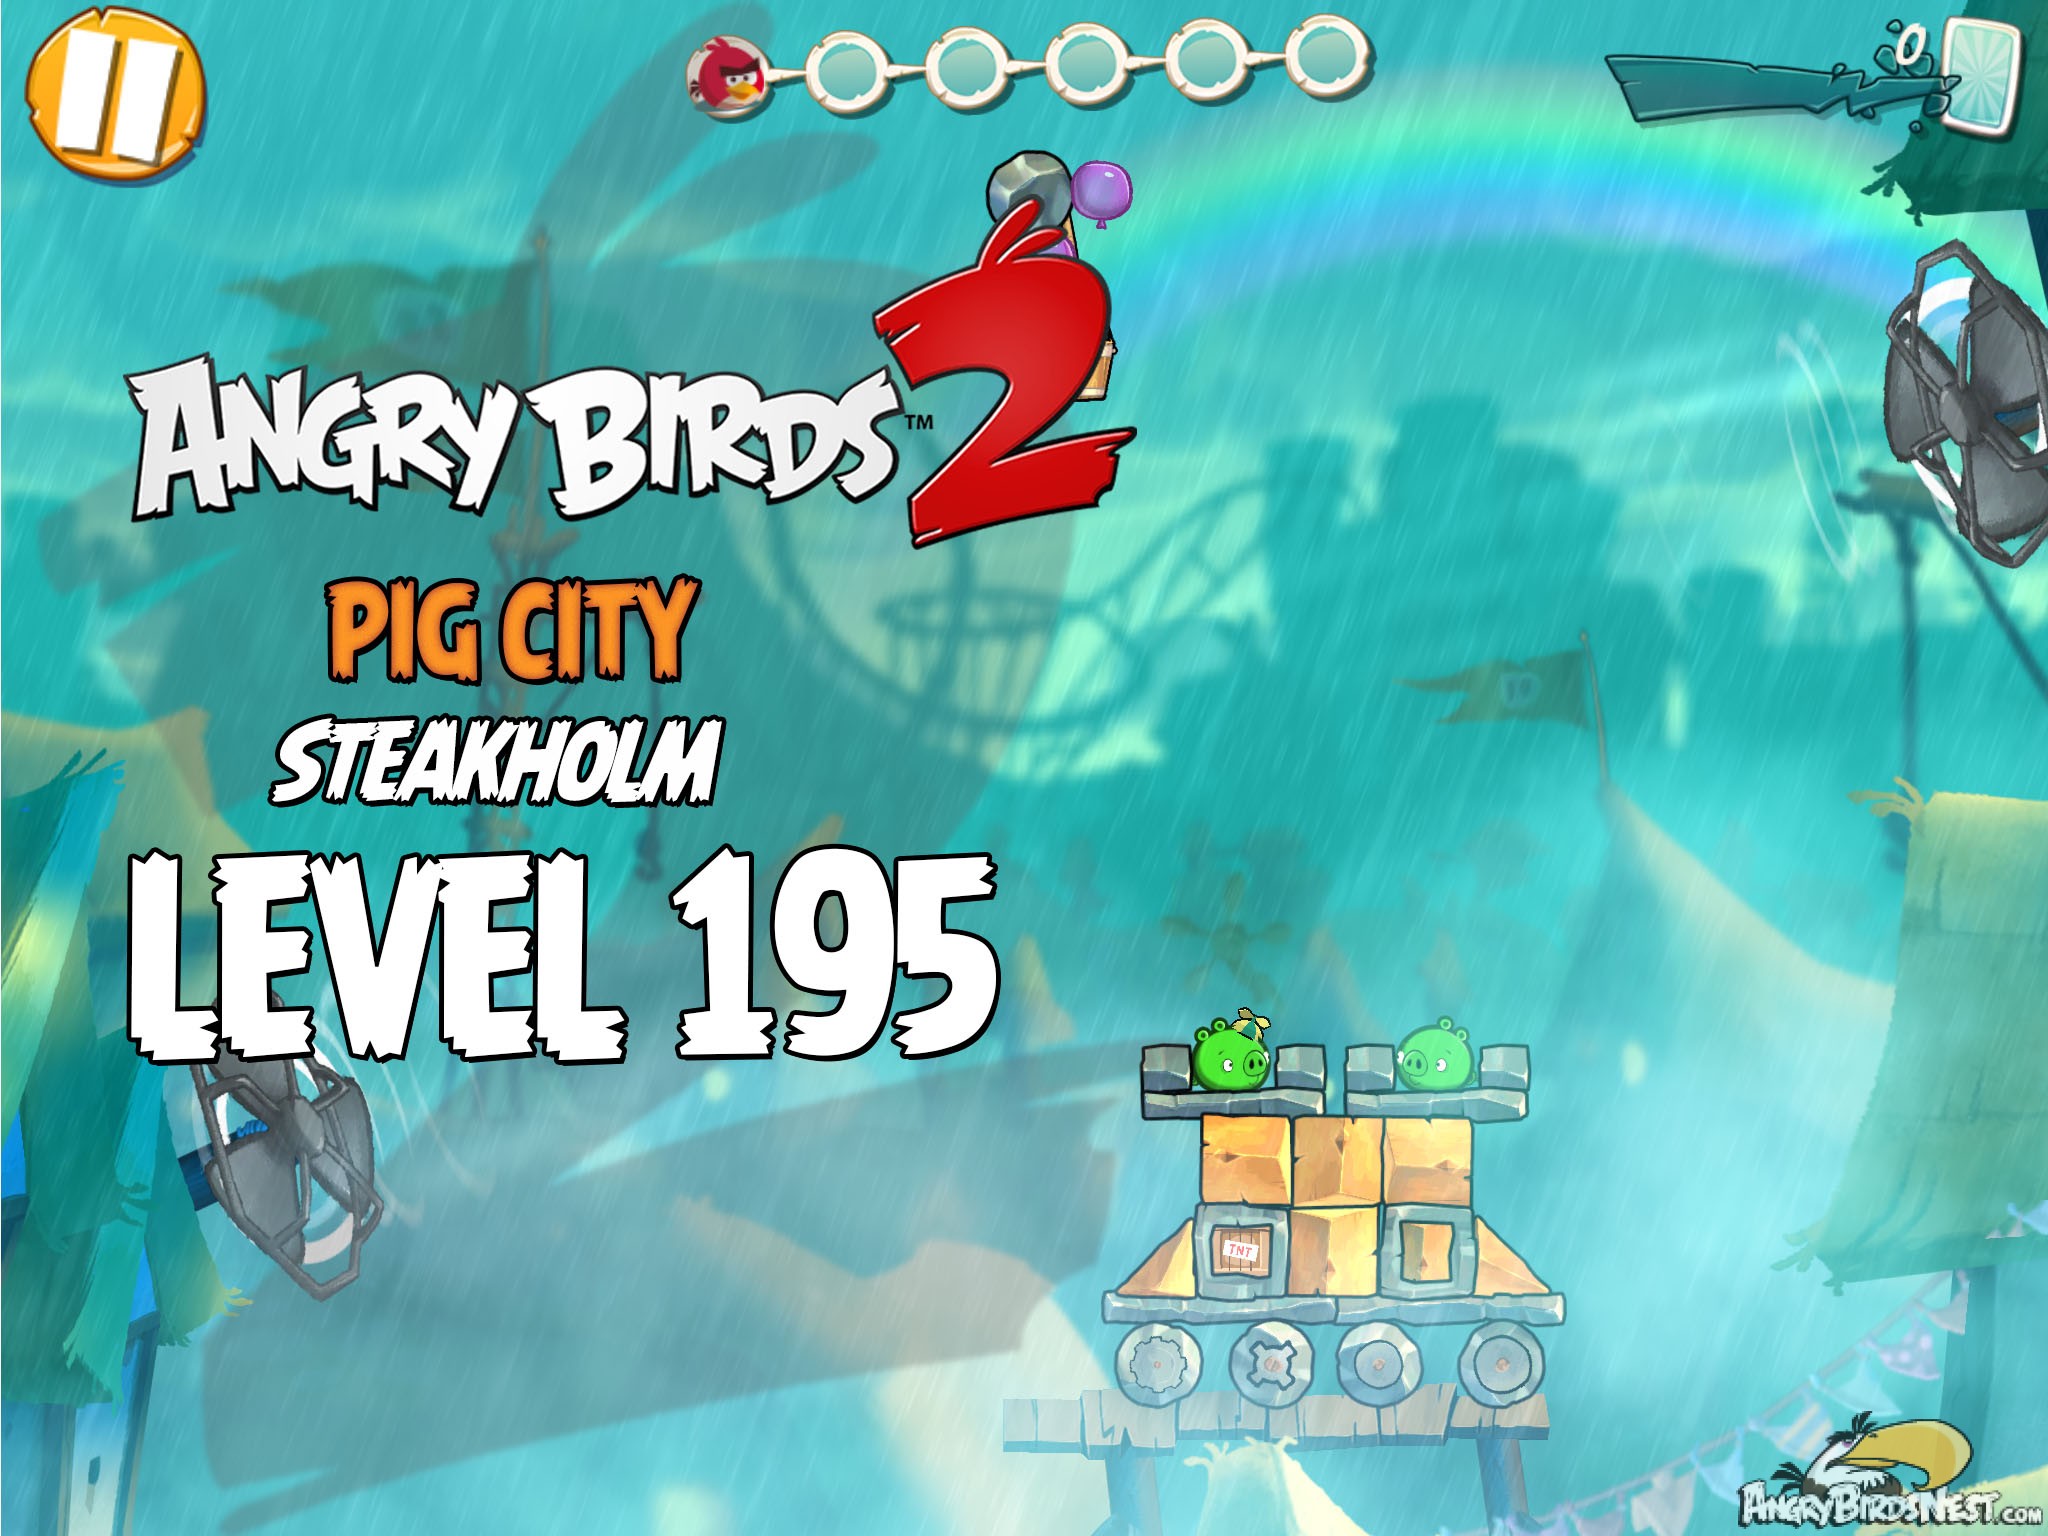 Angry Birds 2 Pig City Steakholm Level 195